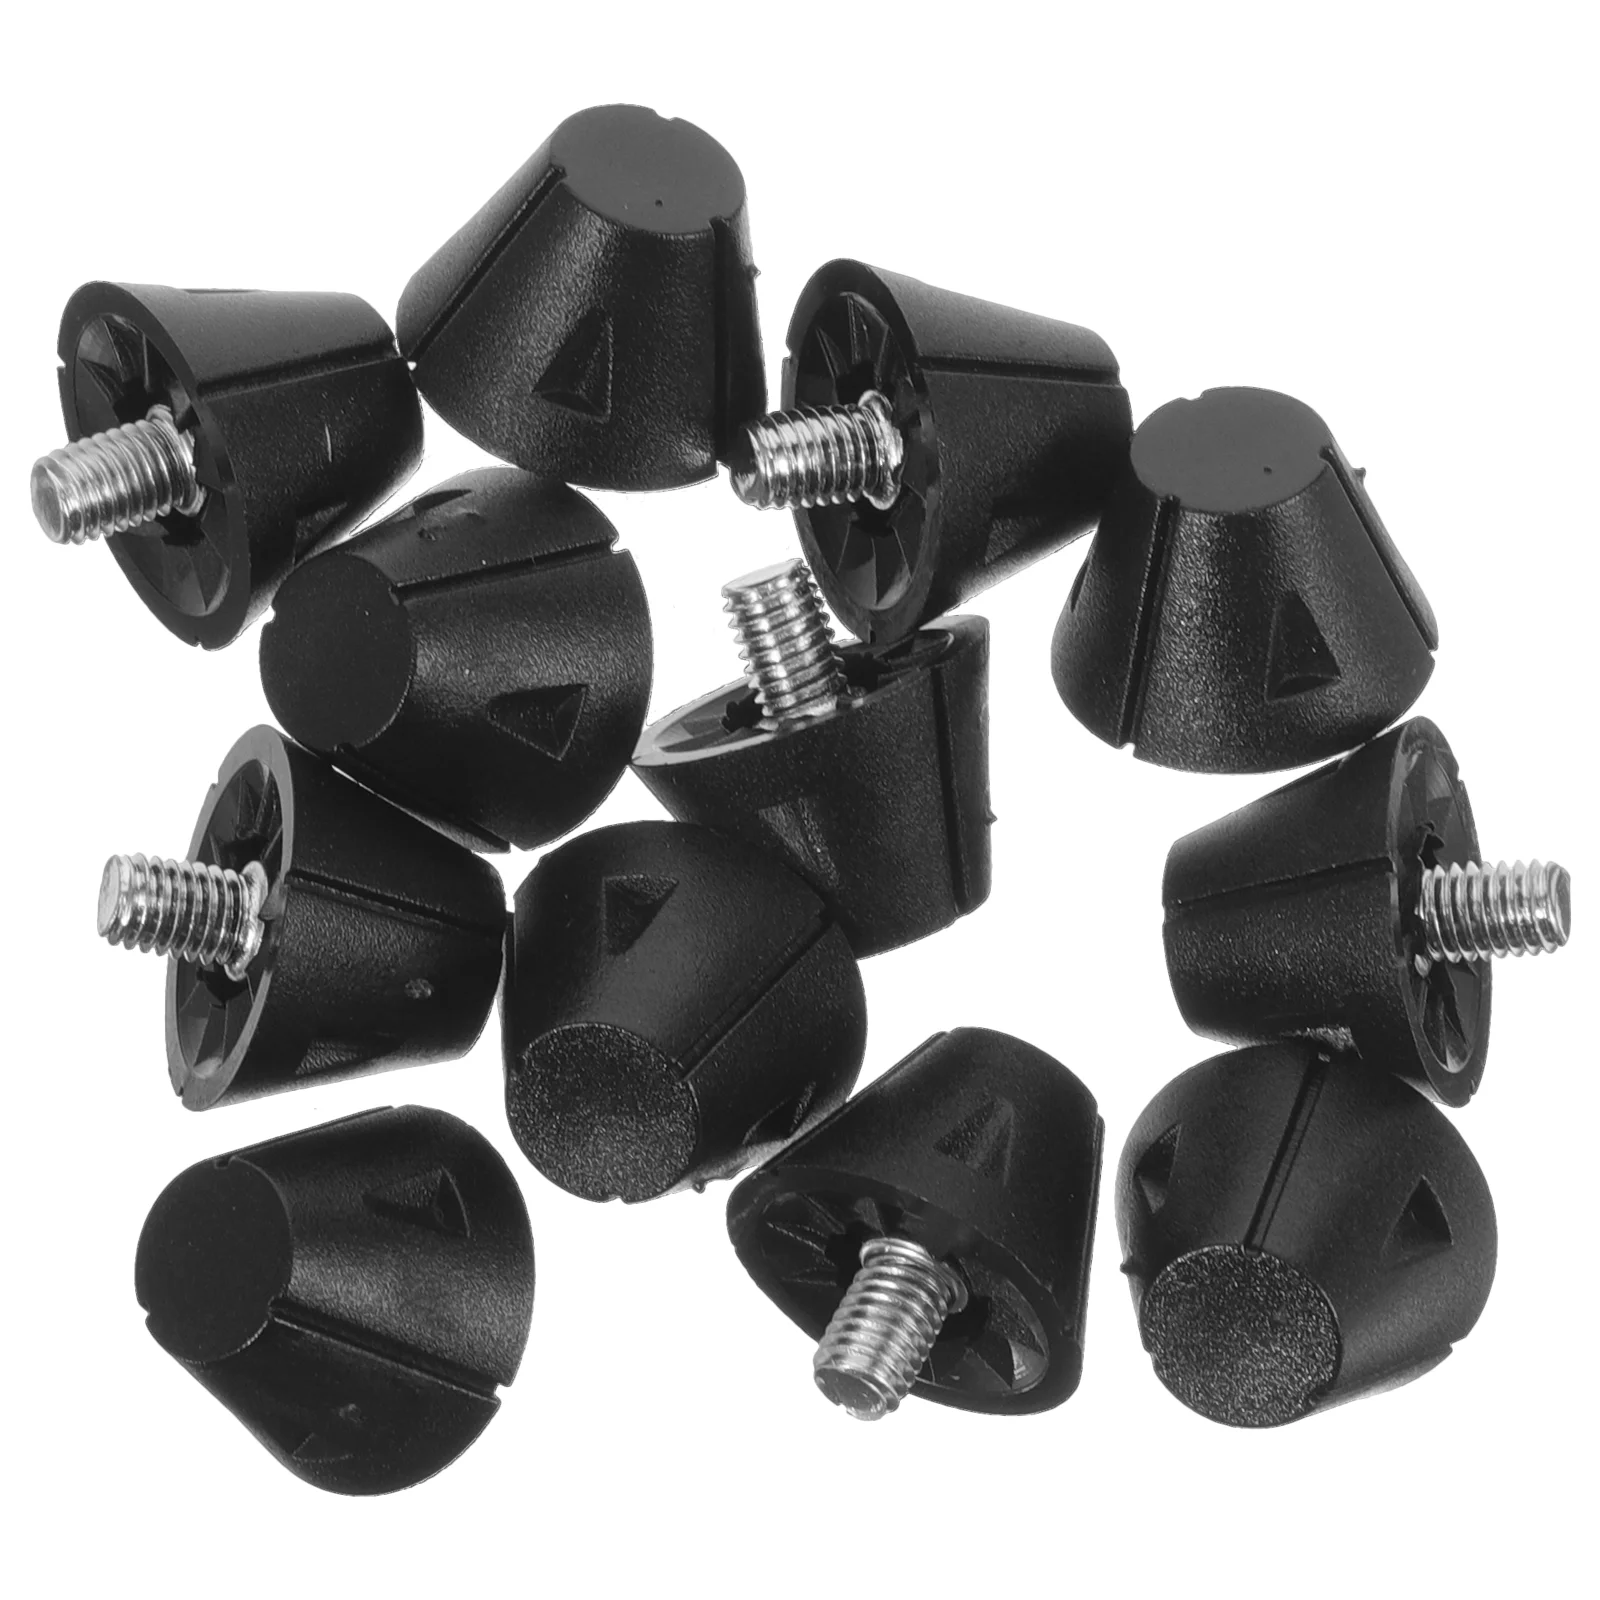 

12Pcs Track Shoes Replacement Spikes Track Shoes Football Spikes Nails Multipurpose Shoes Spikes